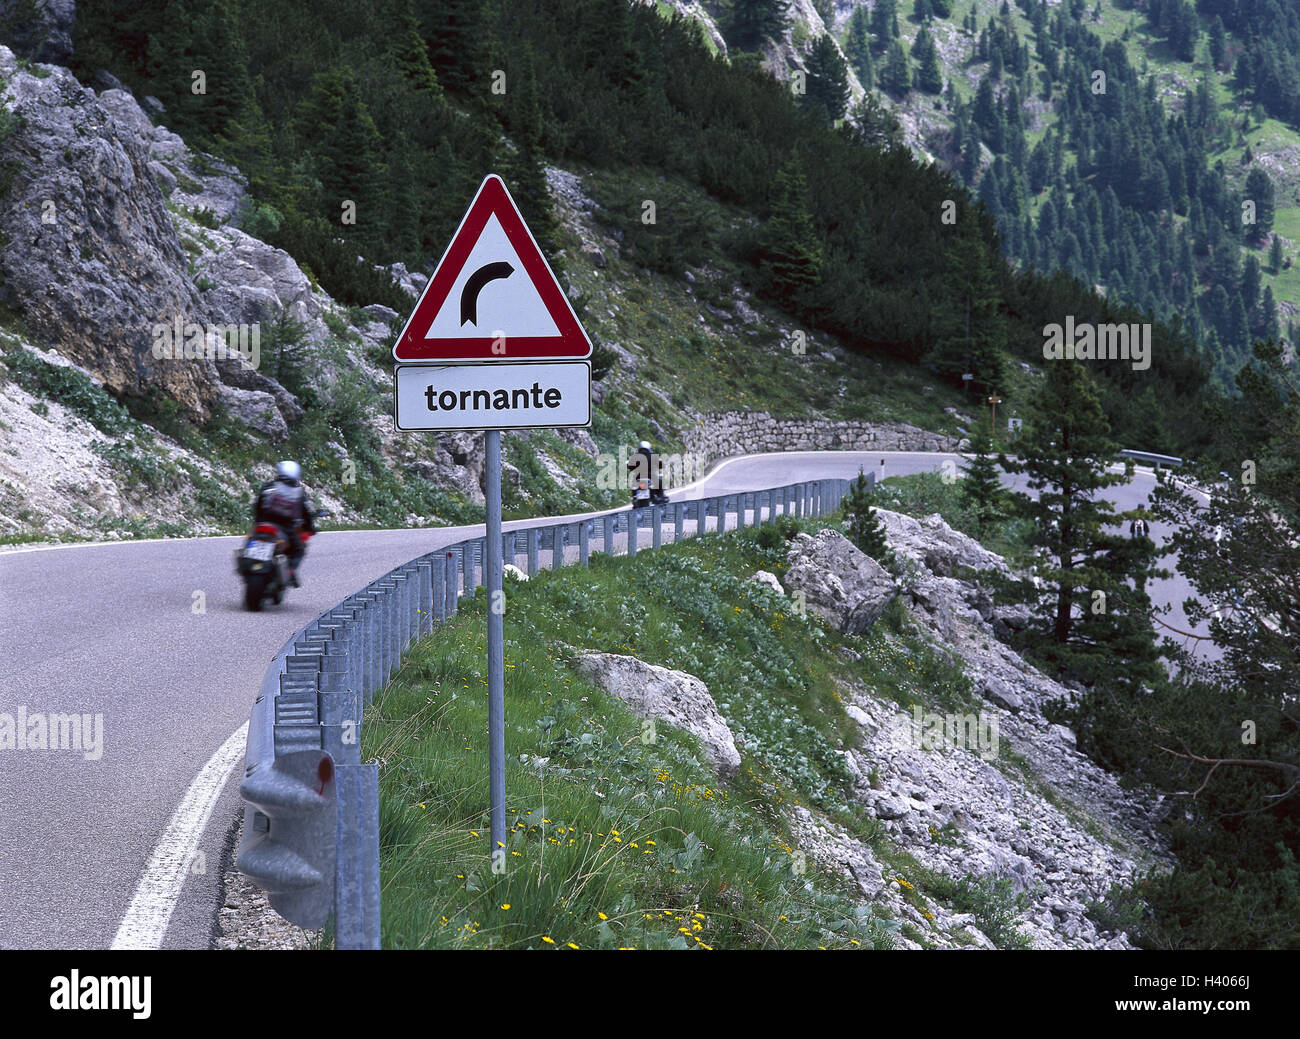 Italy, South Tyrol, mountain landscape, Sellajoch, mountain pass, sign, bend, 'Tornante', motorcyclist, Europe, alps, dolomites, mountains, street, mountain road, pass, guardrail, road sign, traffic sign, sign, danger sign, danger, tip, in Italian, Turning, Bend, Legal bend, bendy, motorcycles, traffic, travelling, excursion, motorcycle driving Stock Photo